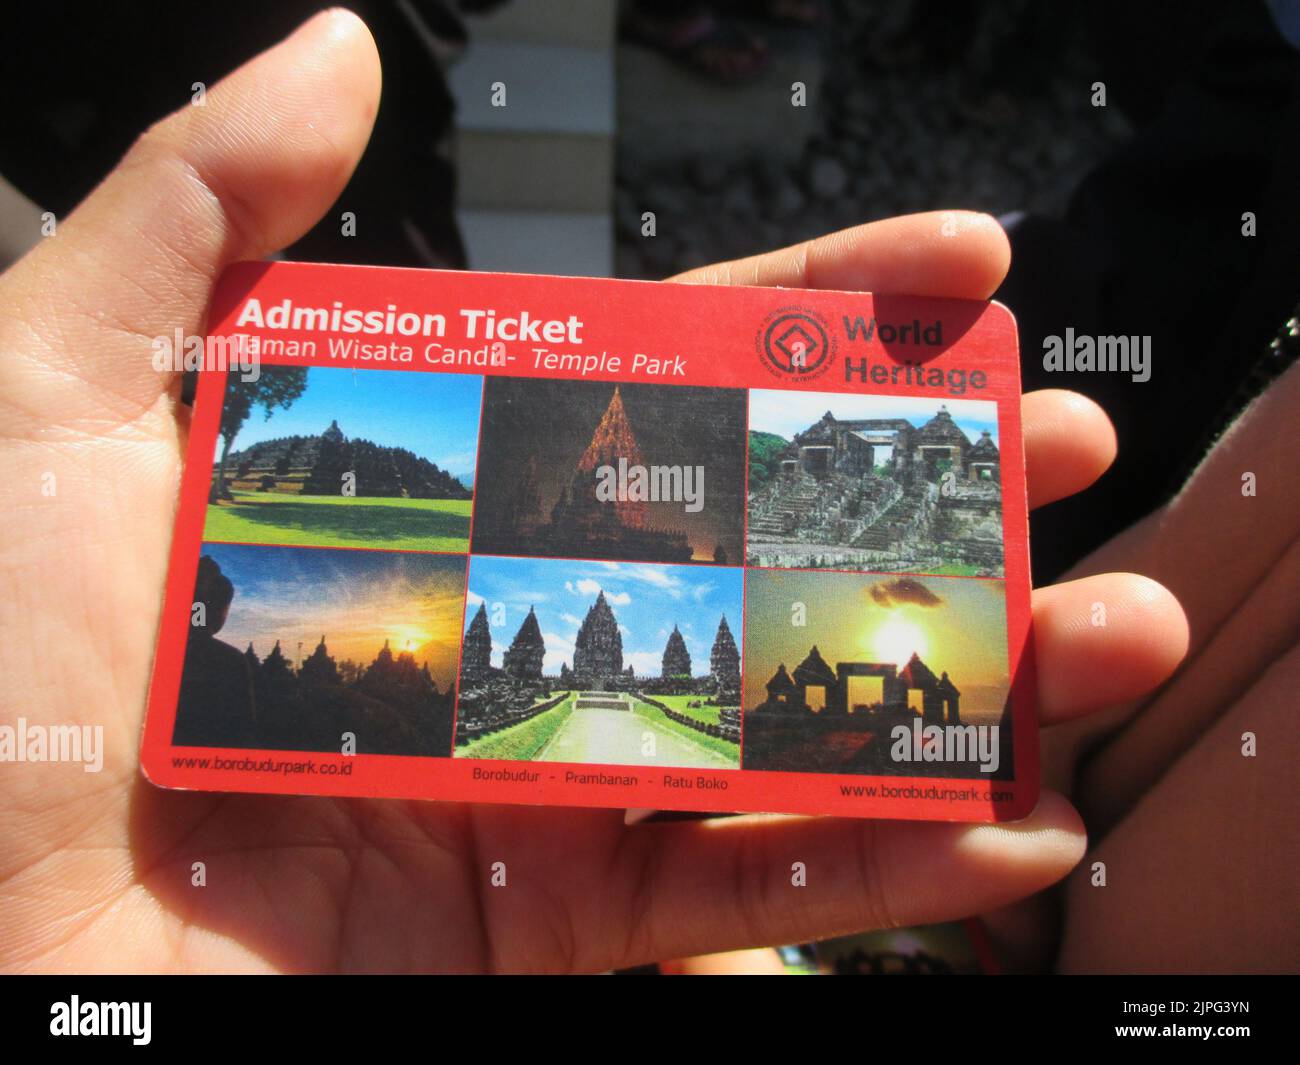 Magelang, INDONESIA, 20 May 2015 - A man's hand holding Admission Ticket of Borobudur Temple for adult visitors Stock Photo